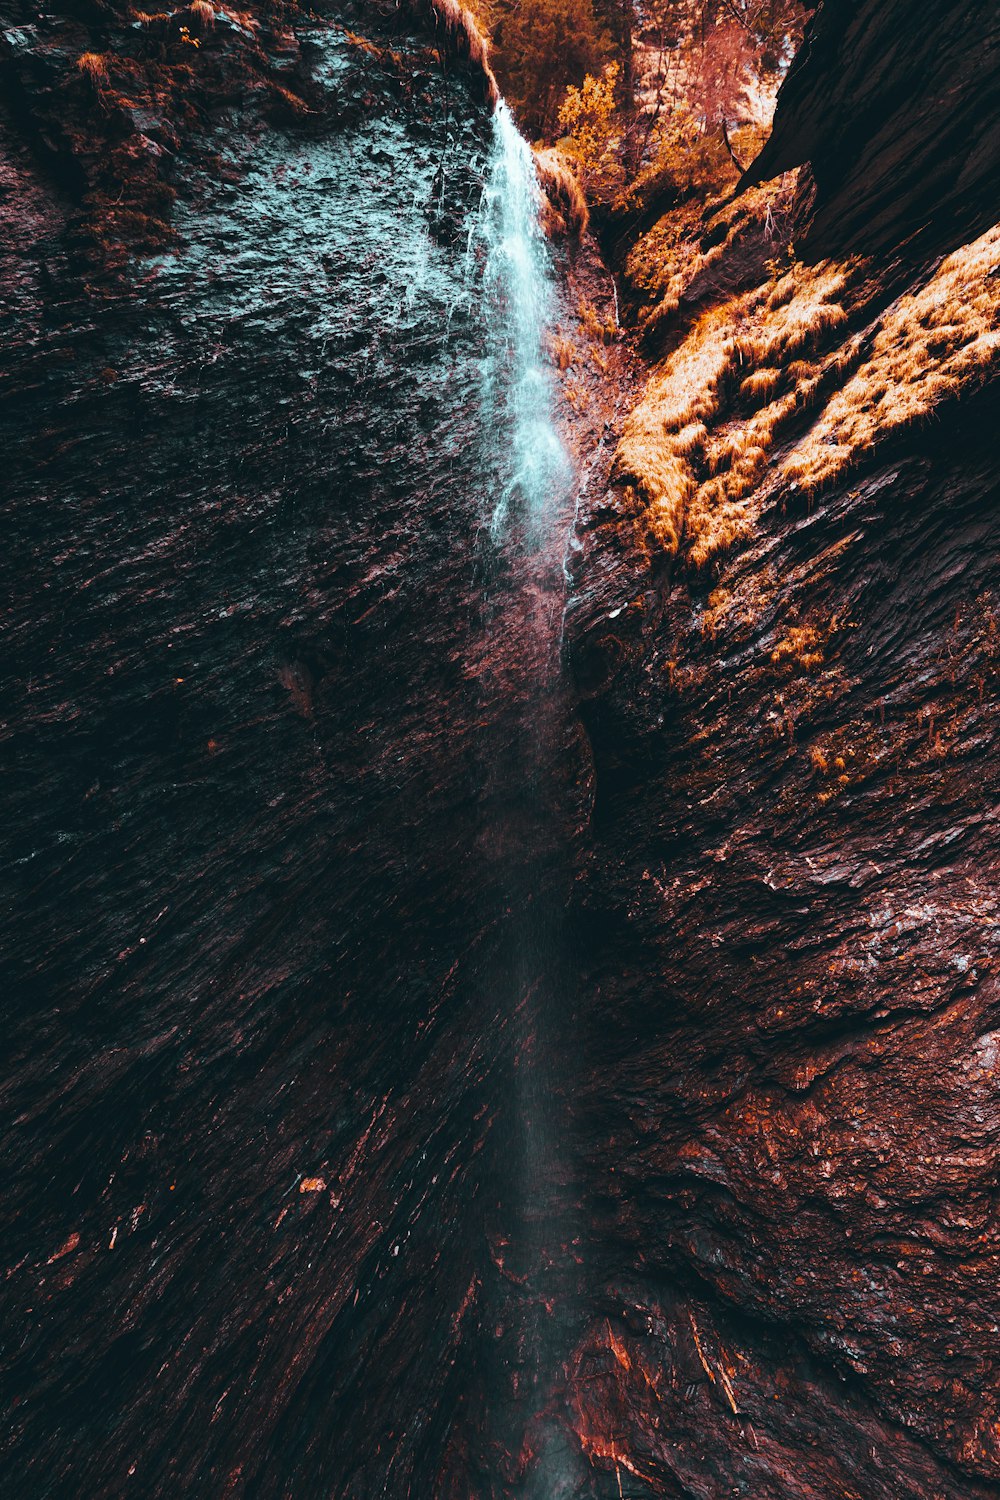 a waterfall in a canyon